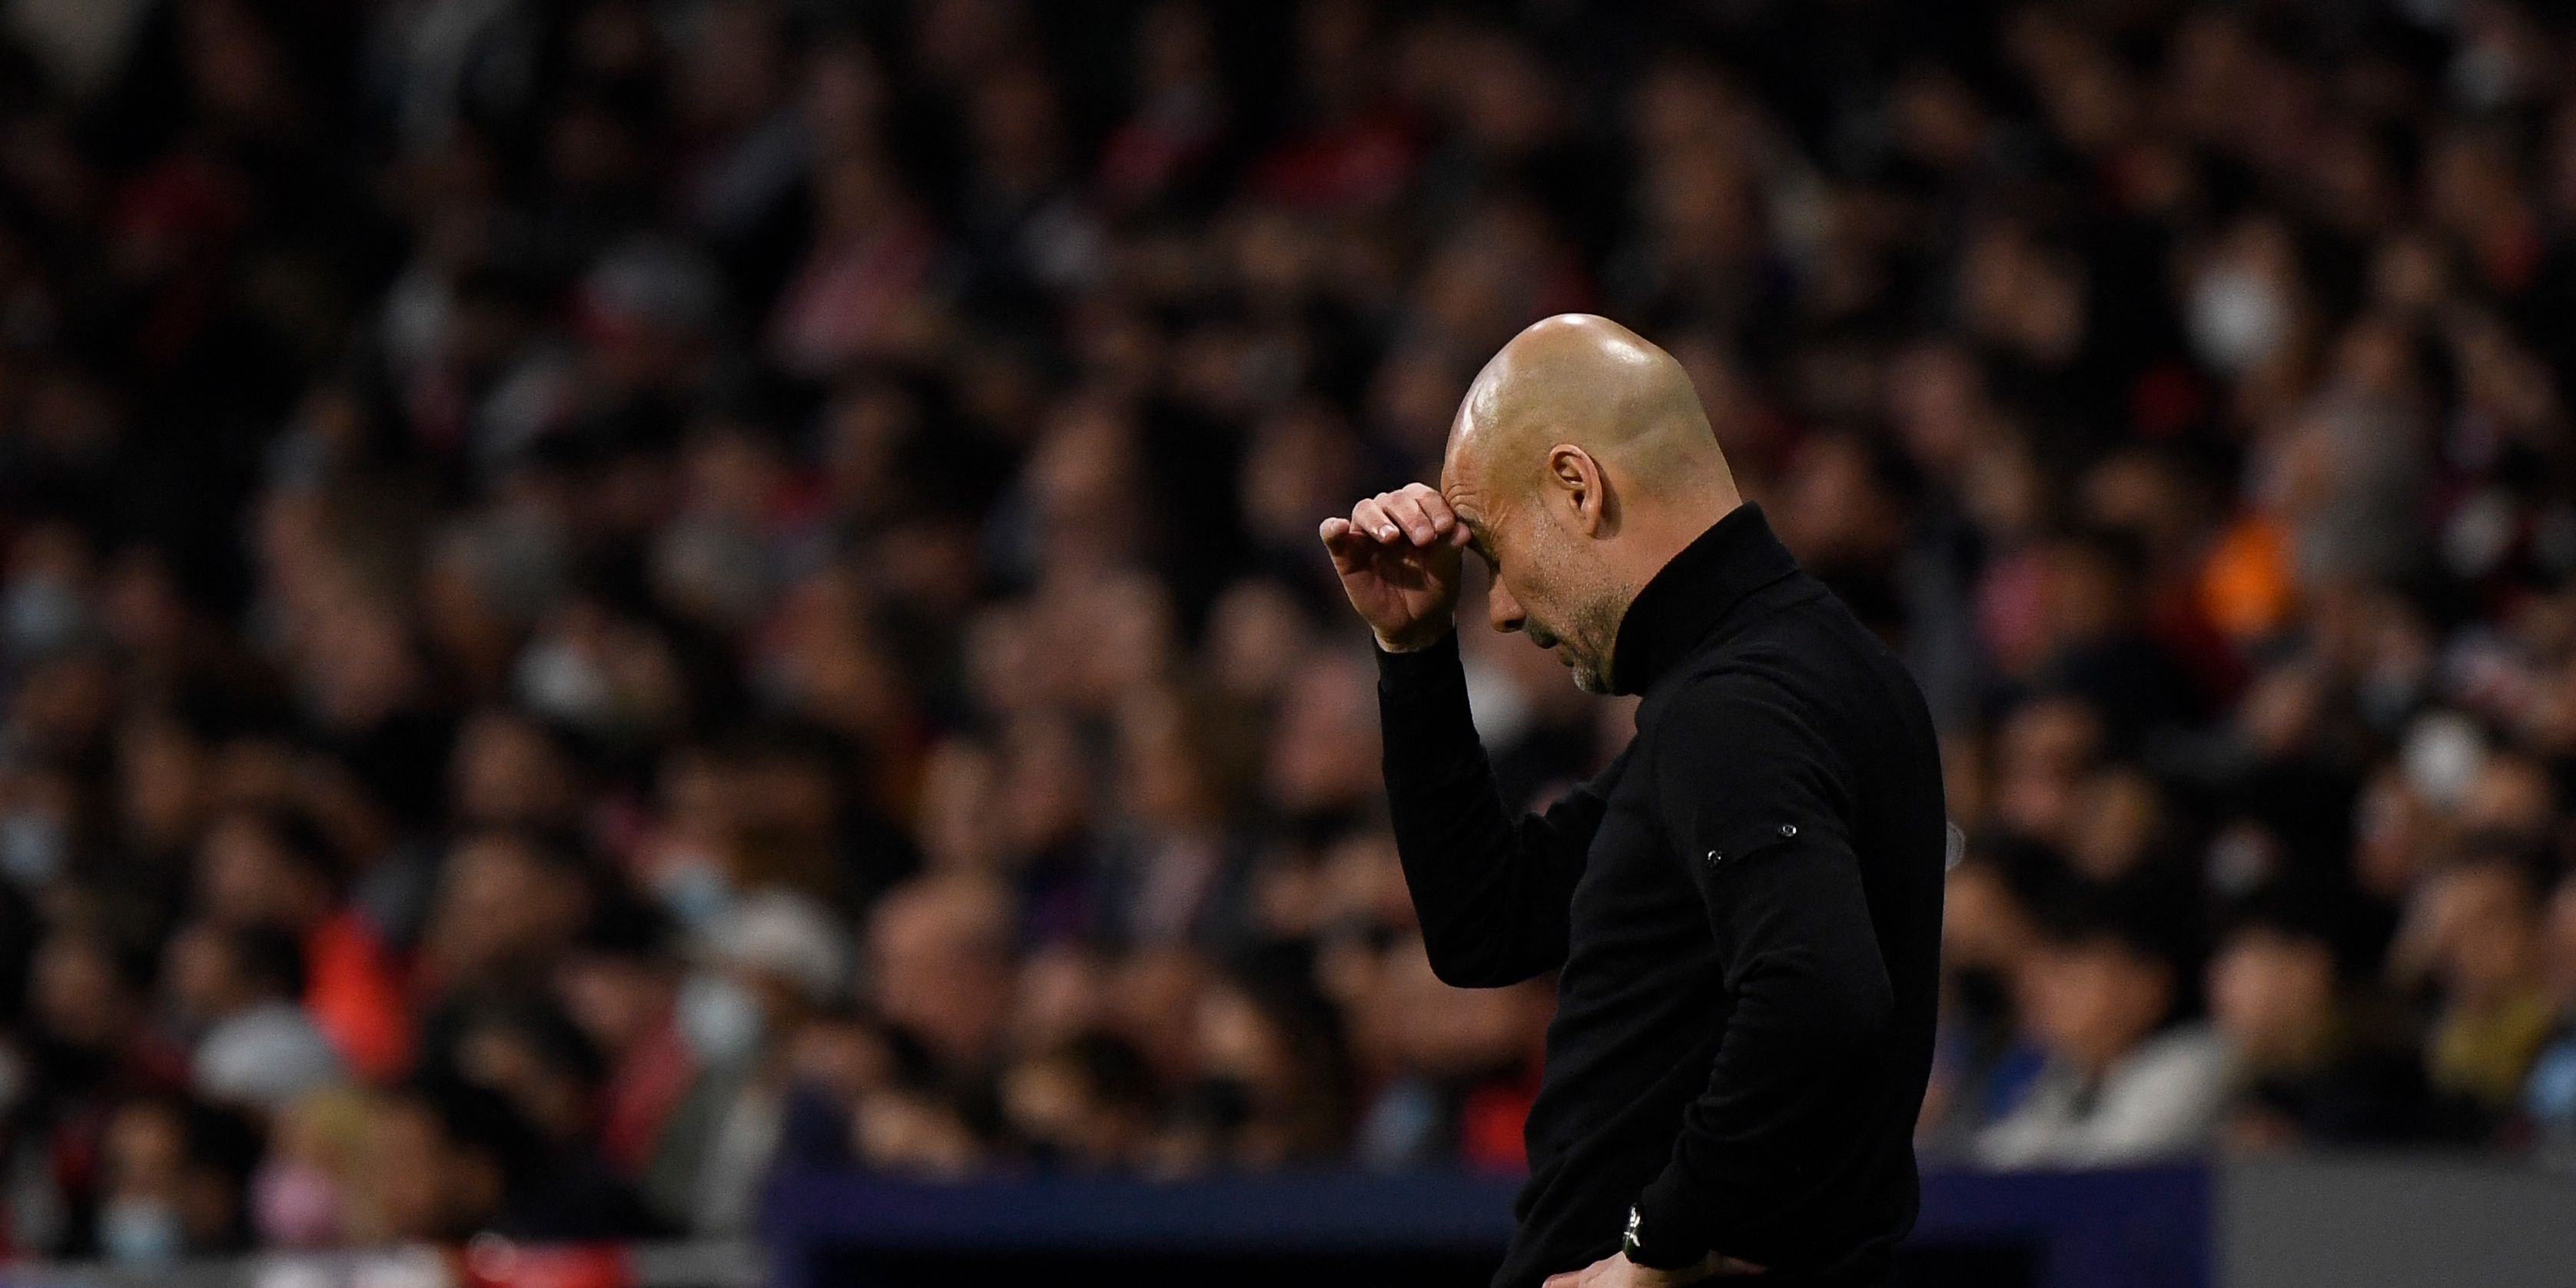 Pep Guardiola tells his players to eat ‘good food and sleep a lot’ to prepare for the ‘hard’ game against Liverpool at Wembley